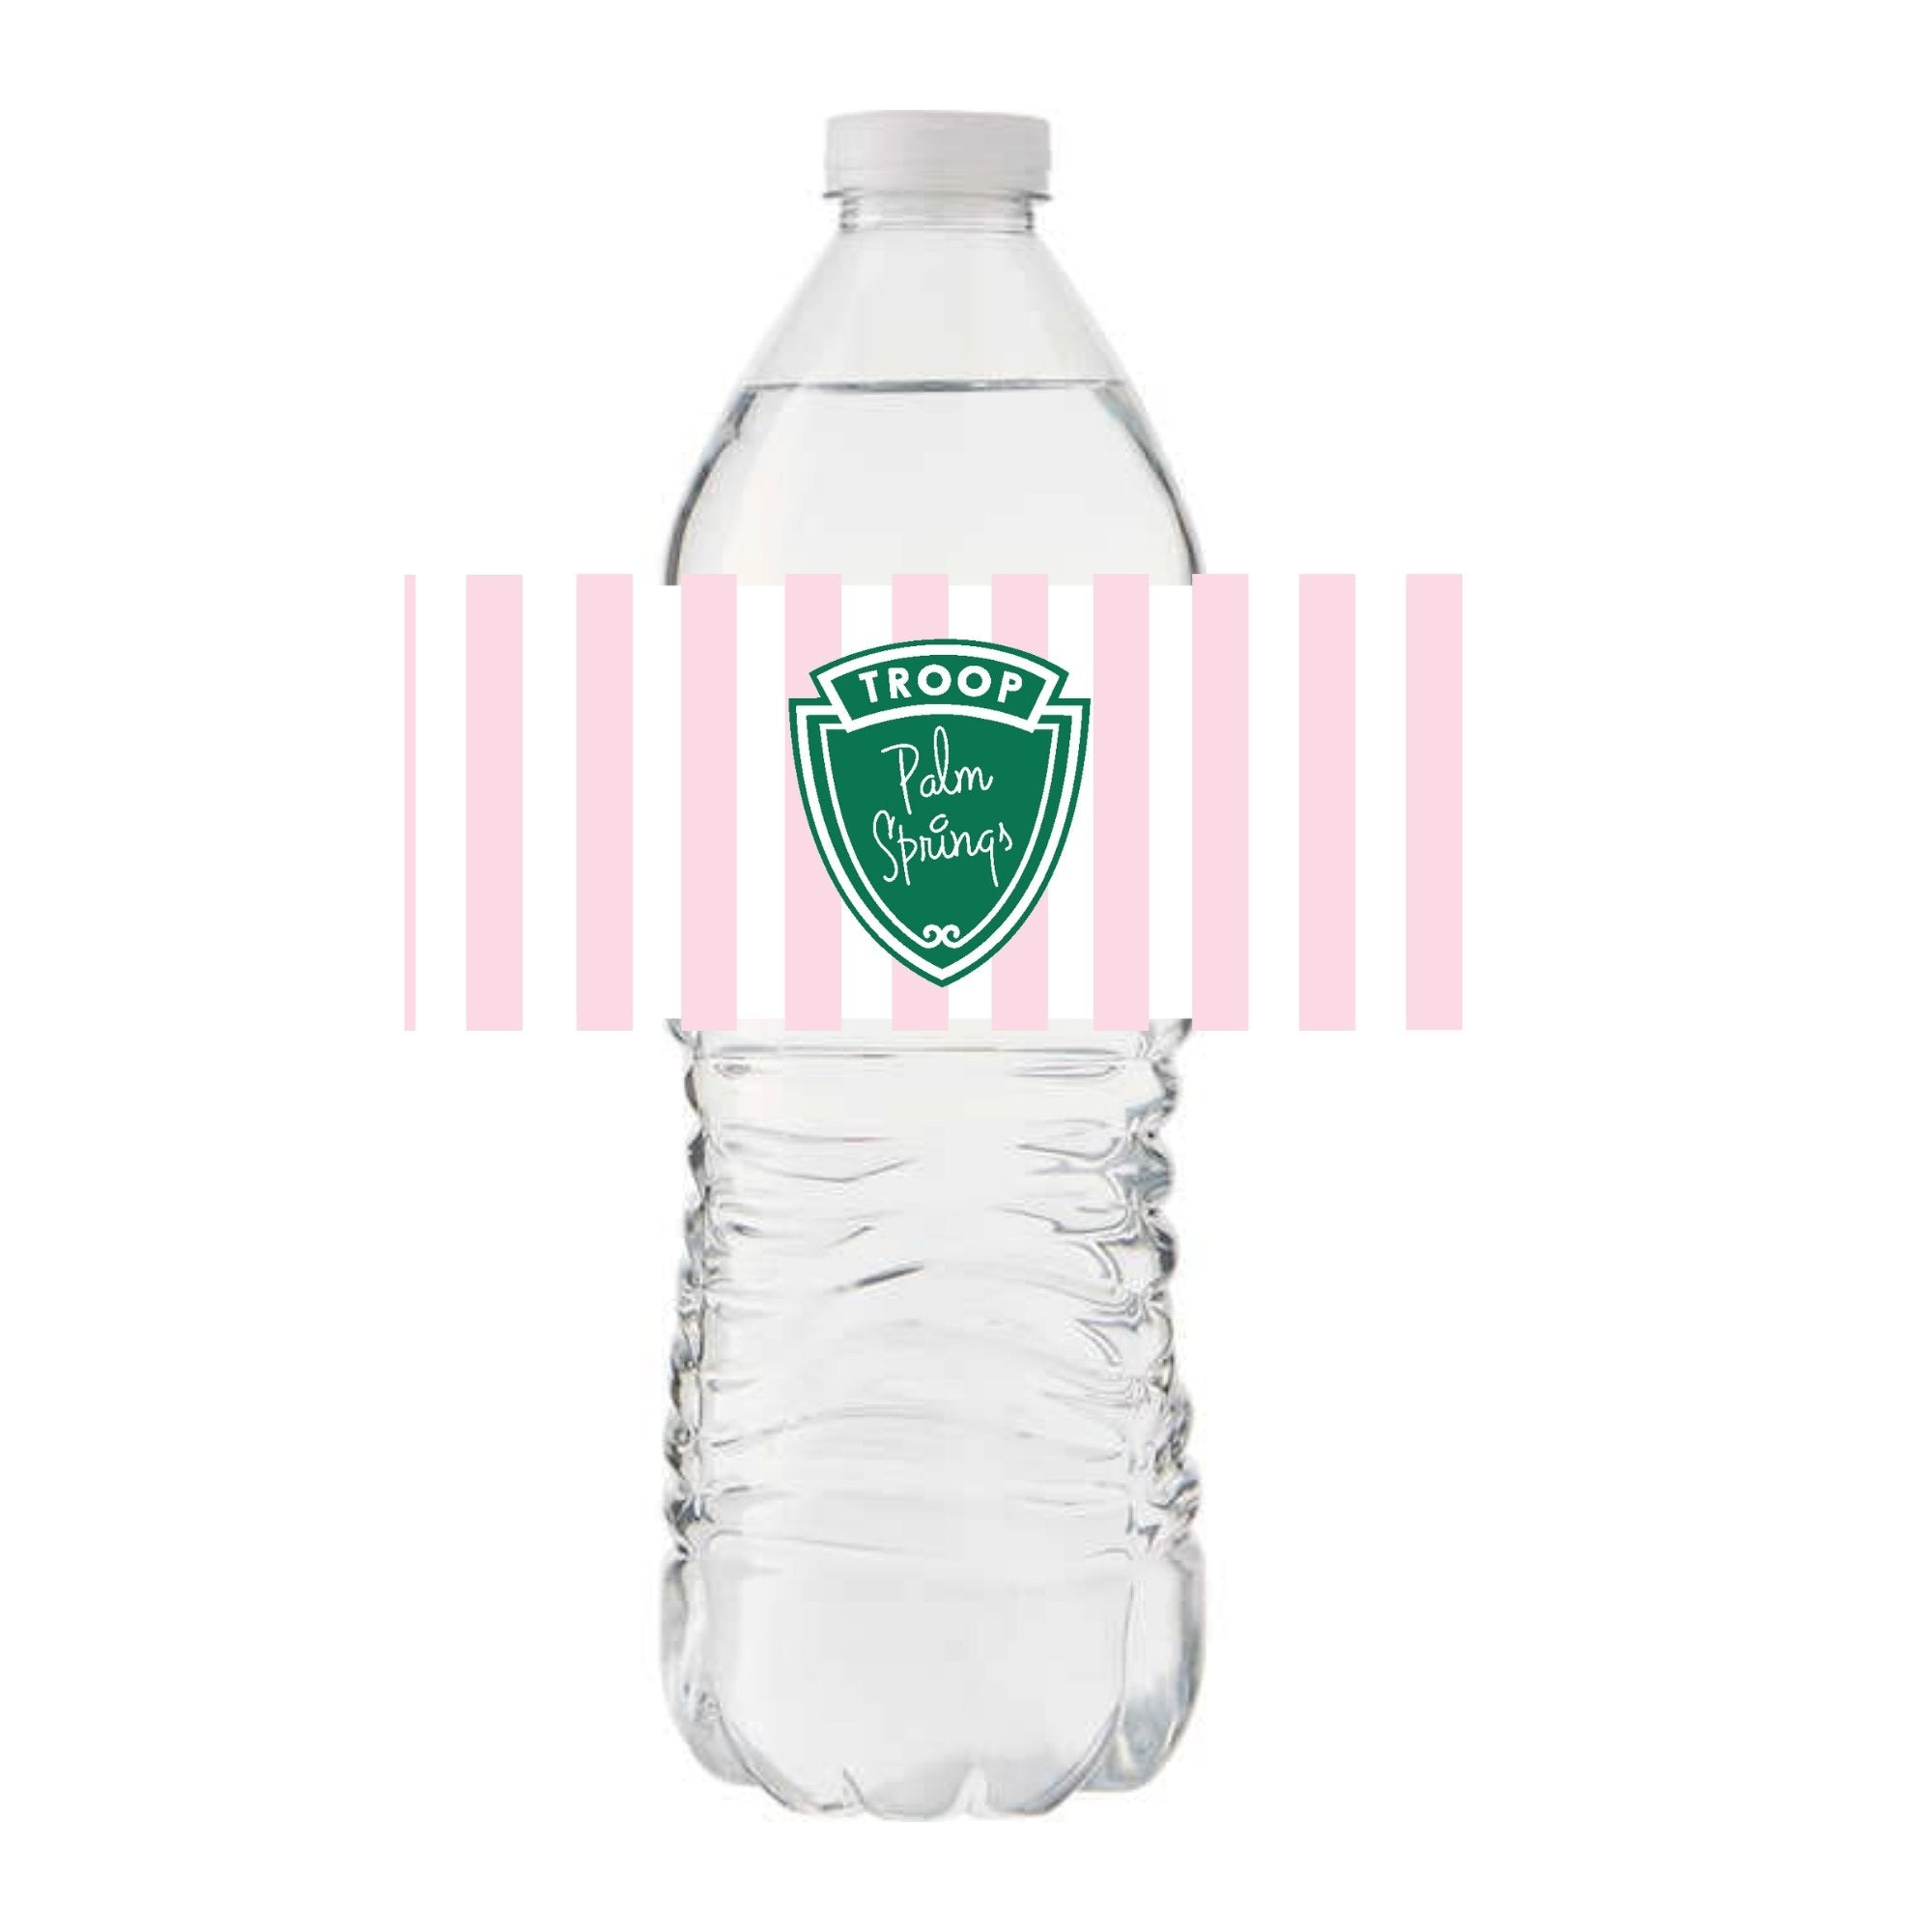 A water bottle is customized with a green and pink troop label